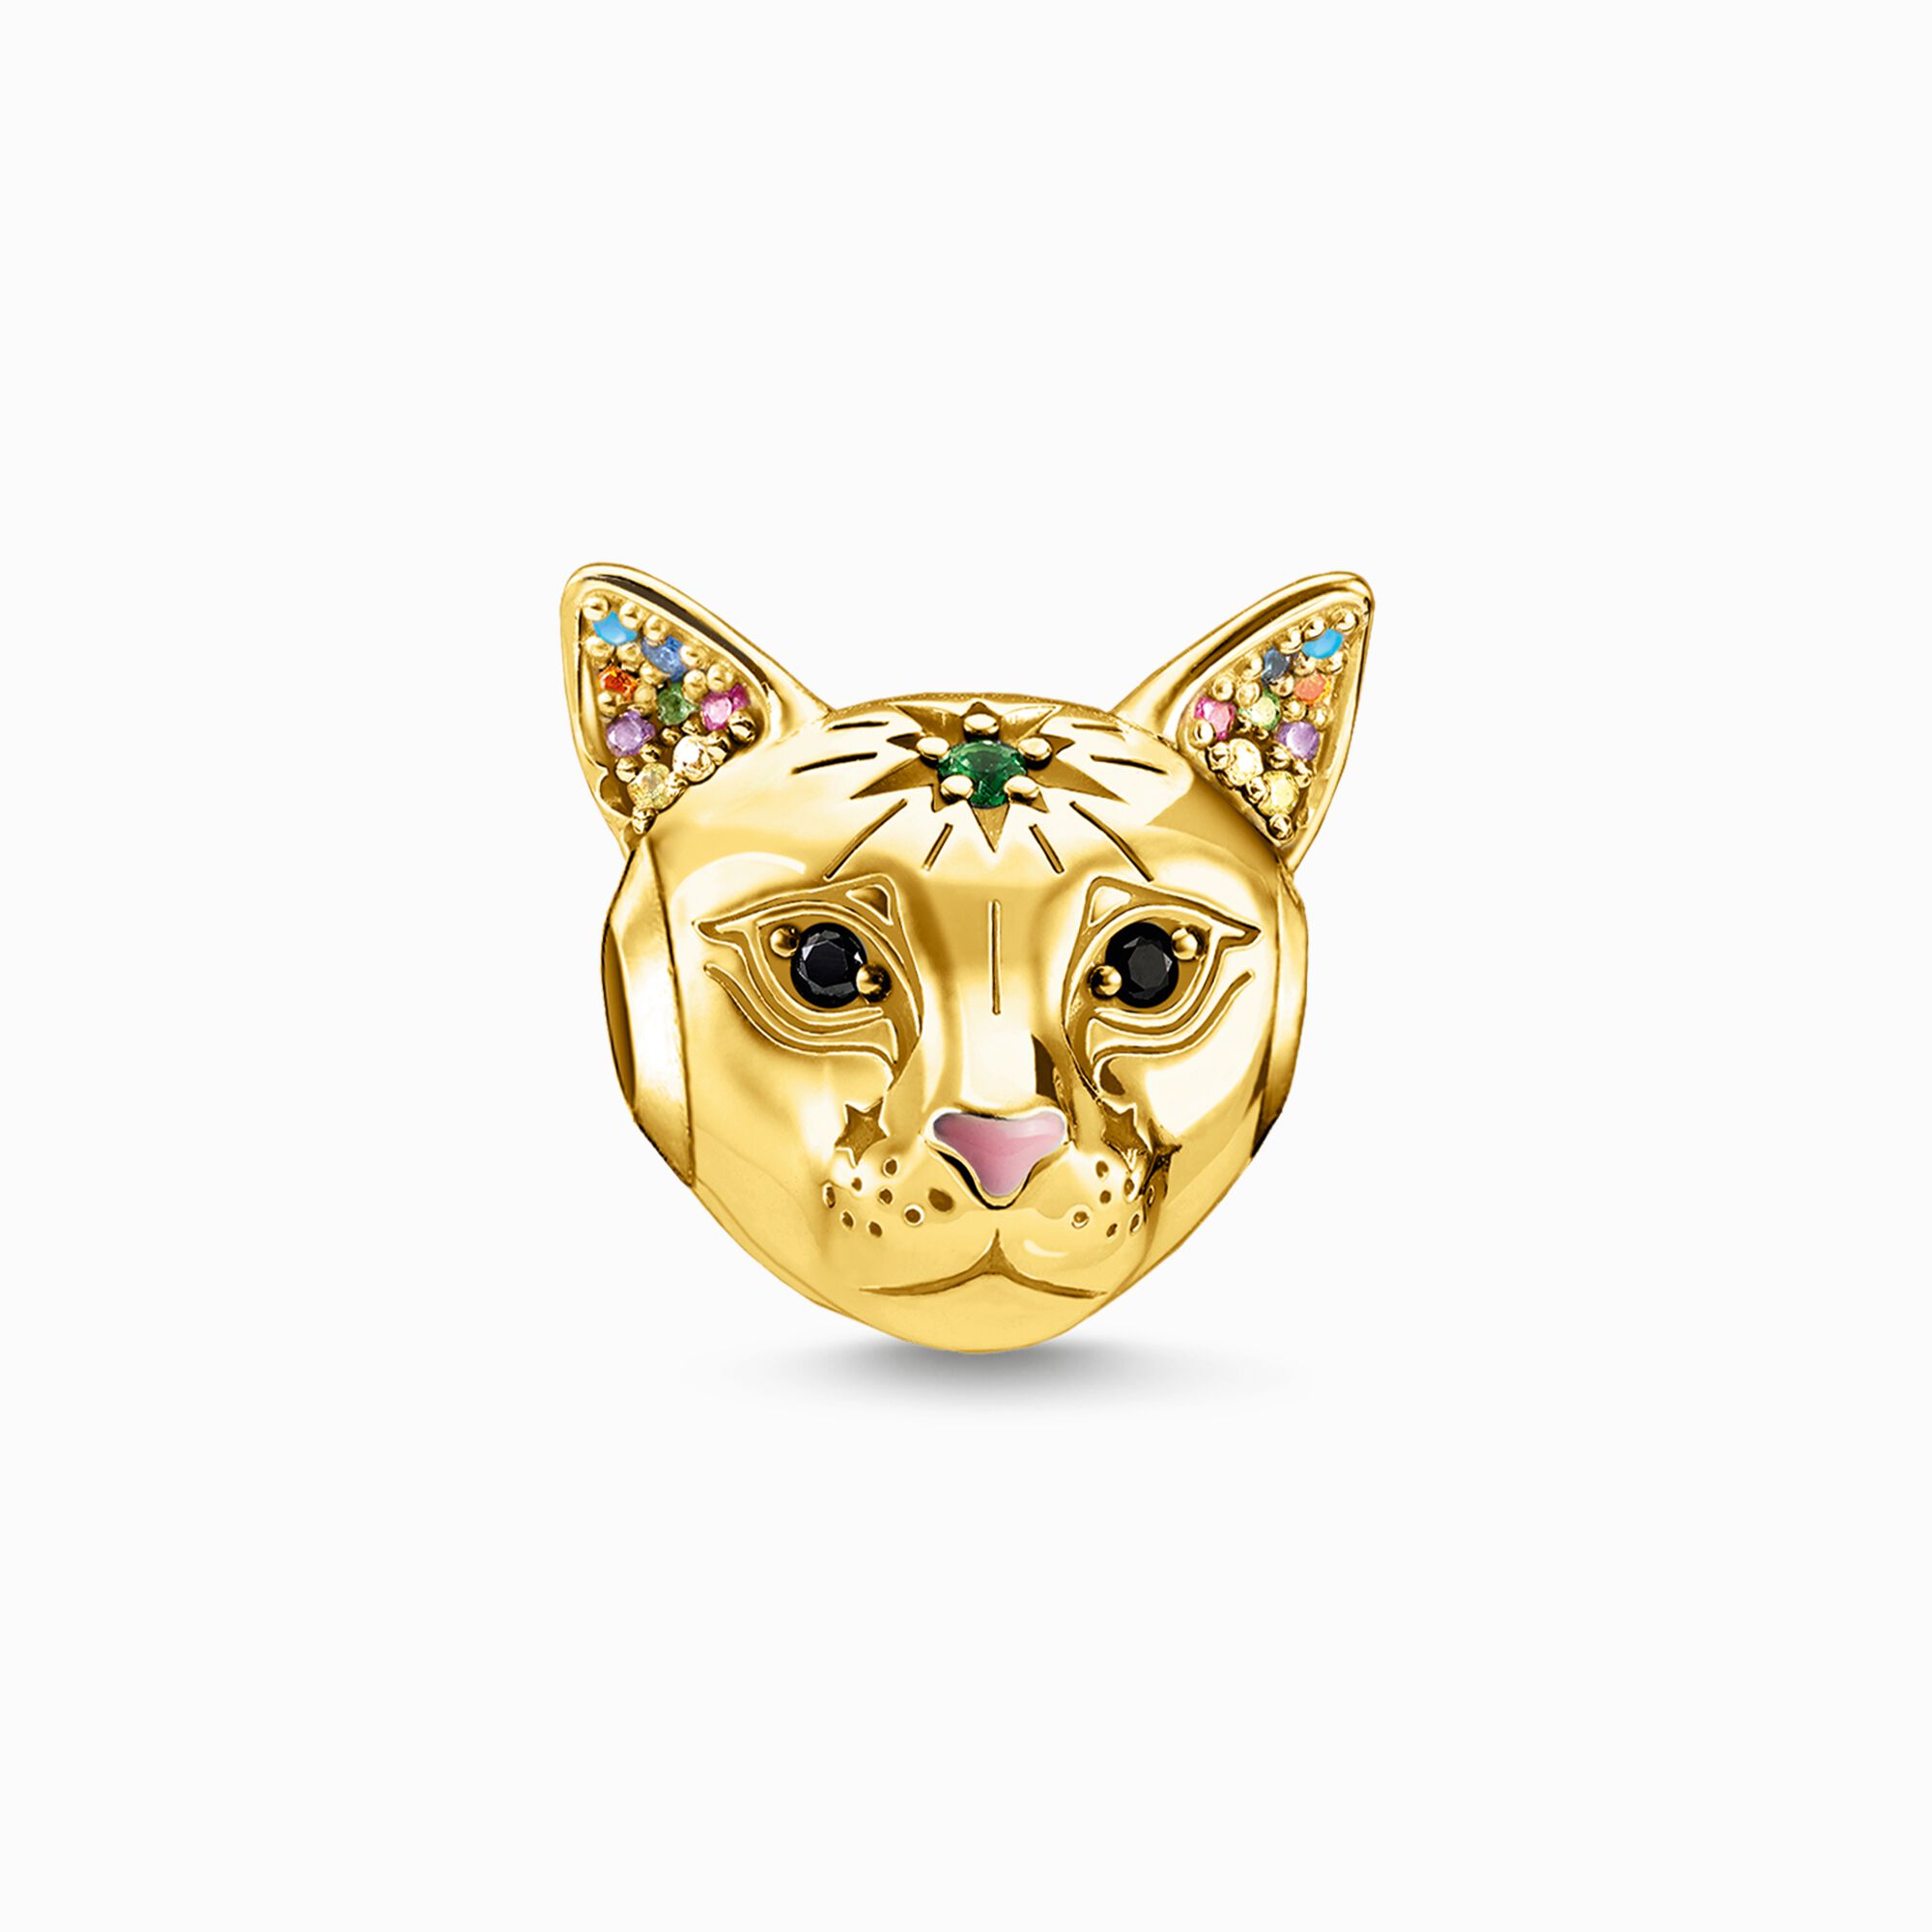 Bead Cat gold from the Karma Beads collection in the THOMAS SABO online store